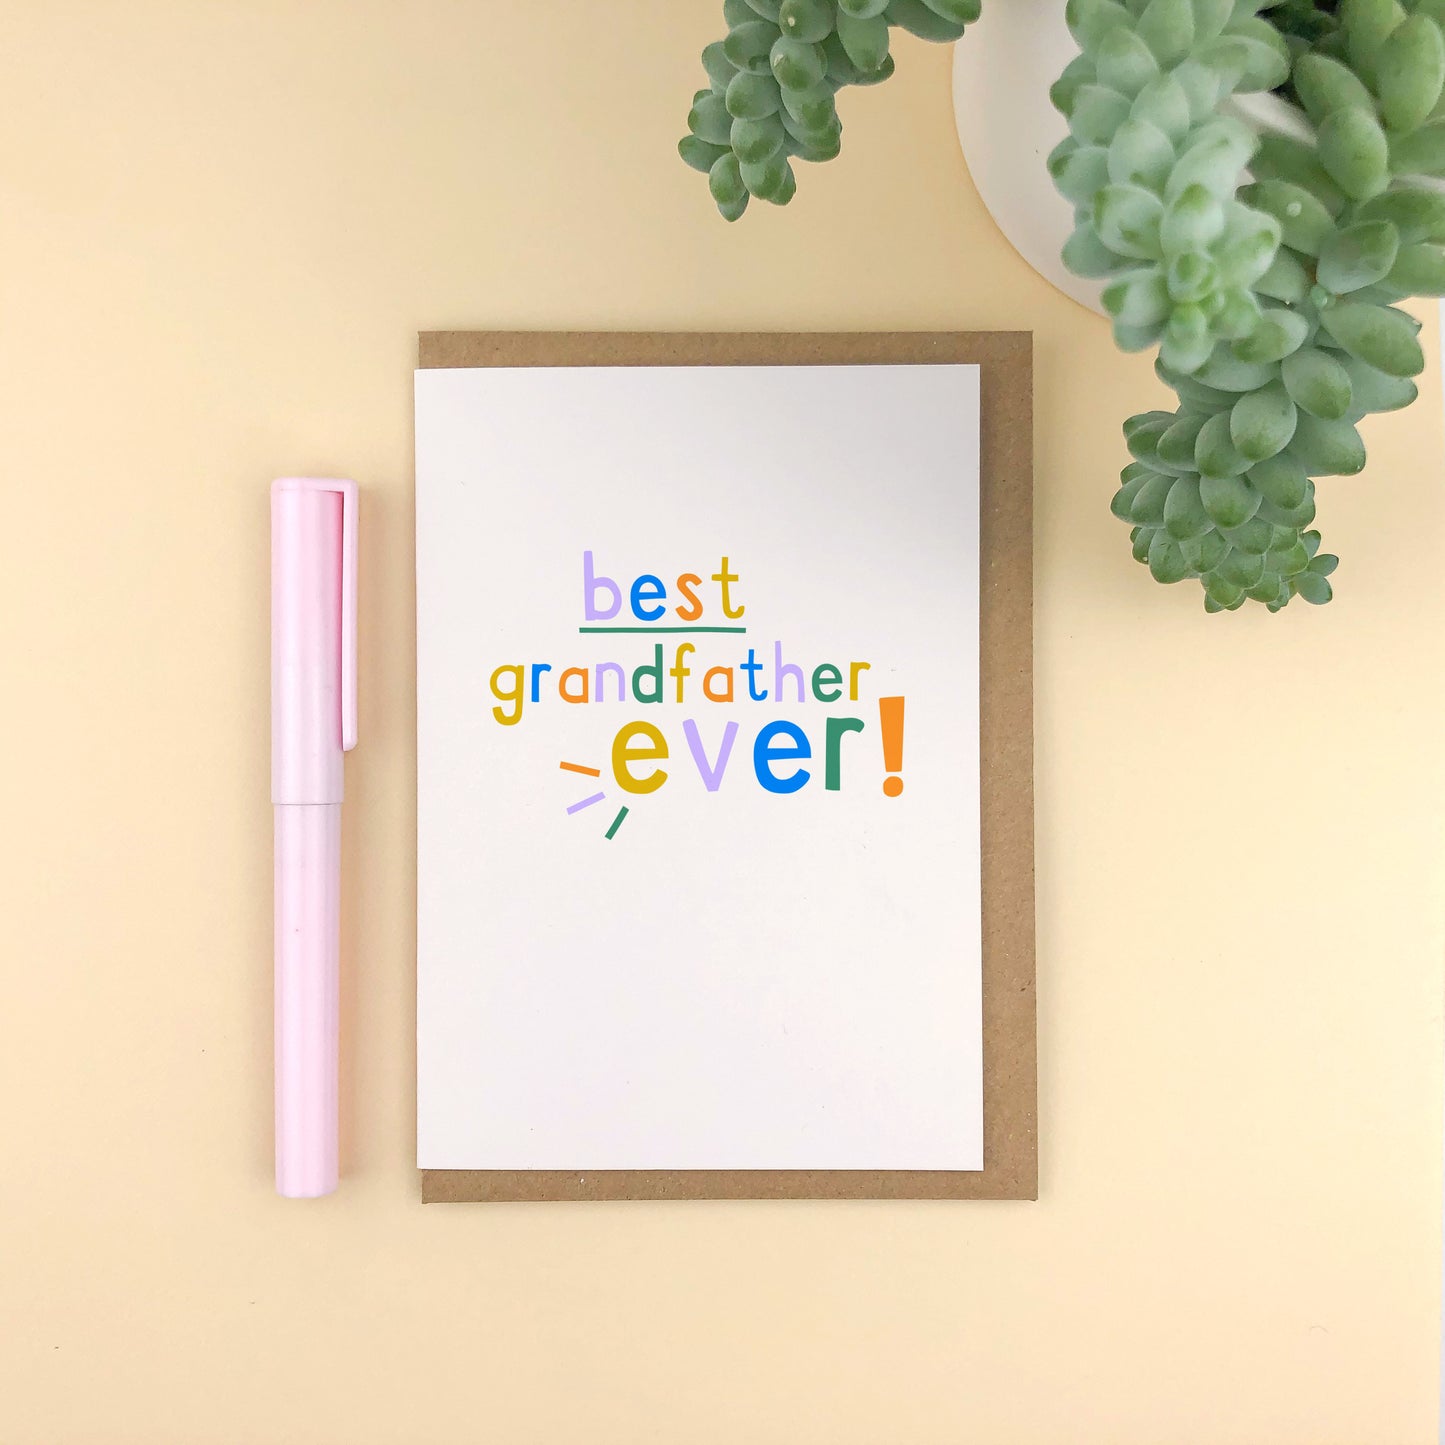 Best Grandfather Ever! Typographic Fathers Day Card